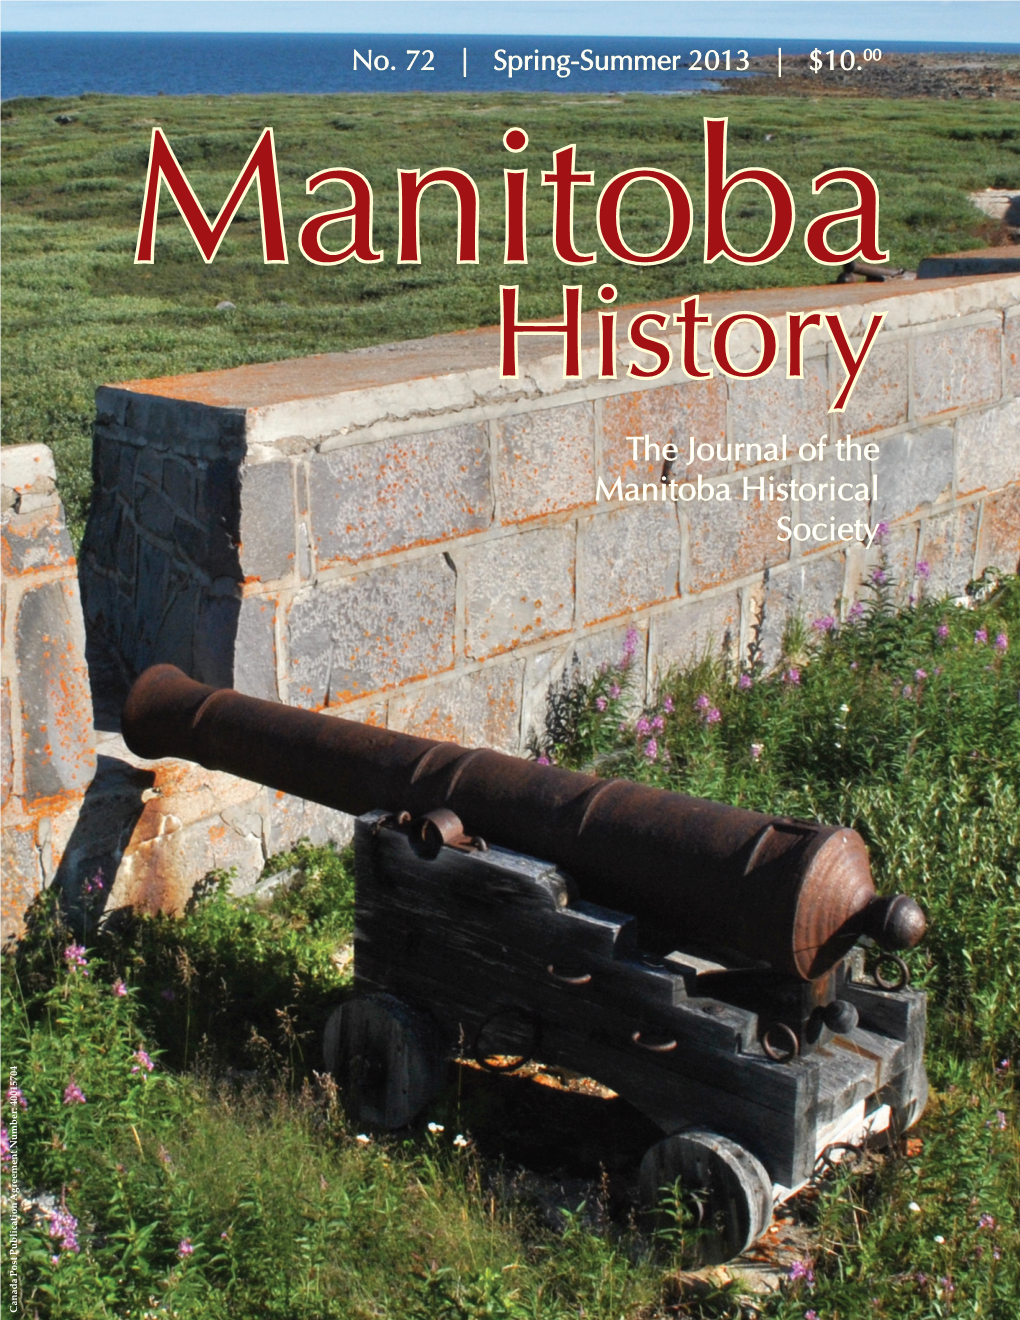 The Journal of the Manitoba Historical Society